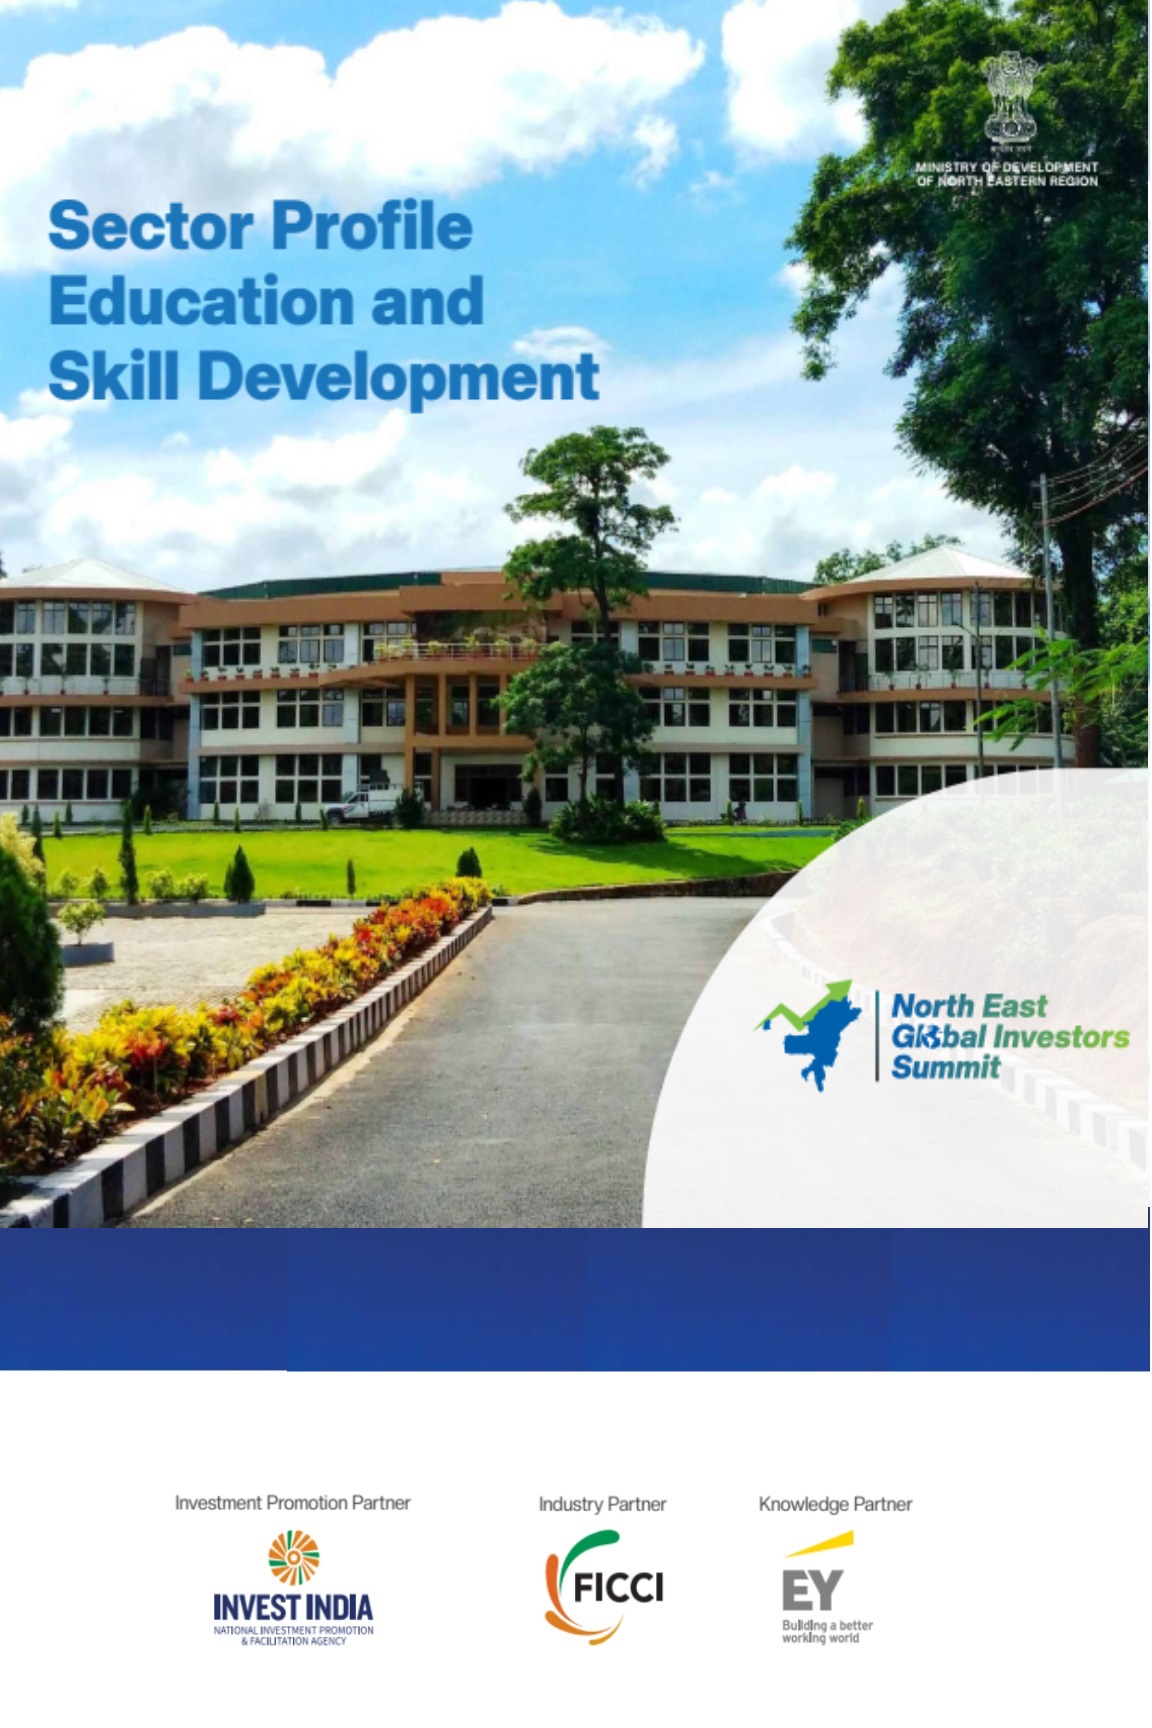 Profile of the Education and Skills sectors in the Northeast